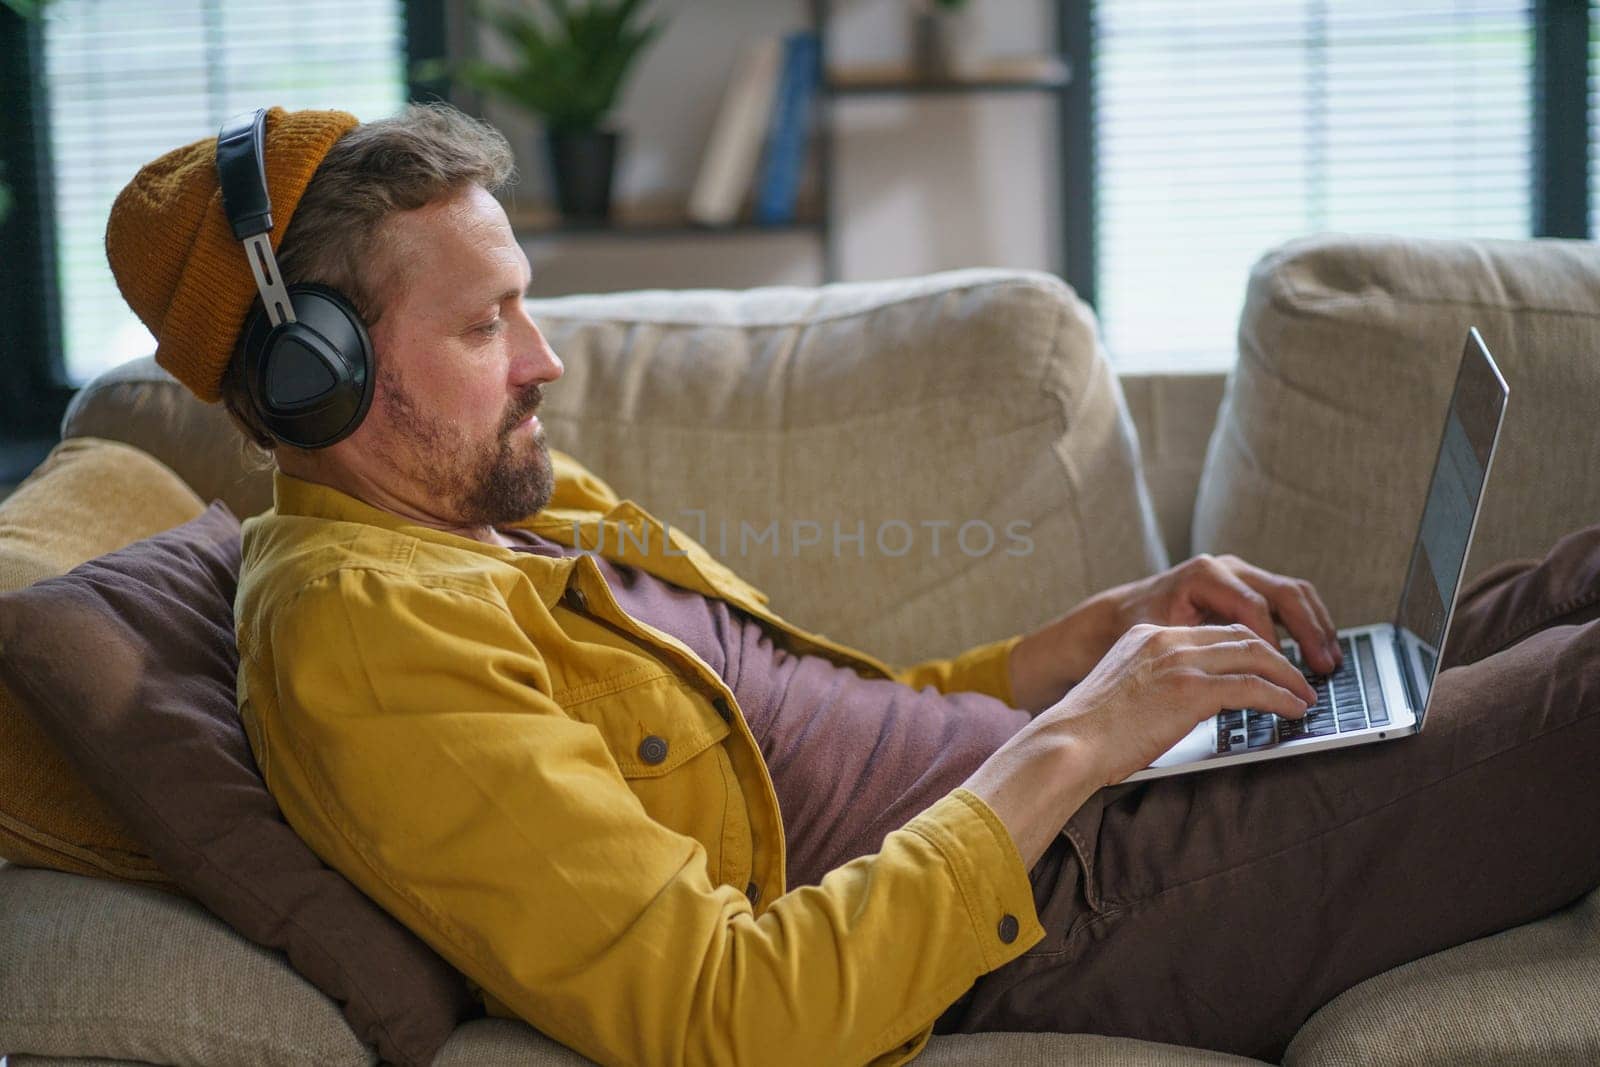 Young man in casual clothing sitting on sofa home, playing online game on laptop. He is fully concentrated on game, wearing headphones and using the keyboard to control action on screen. High quality photo